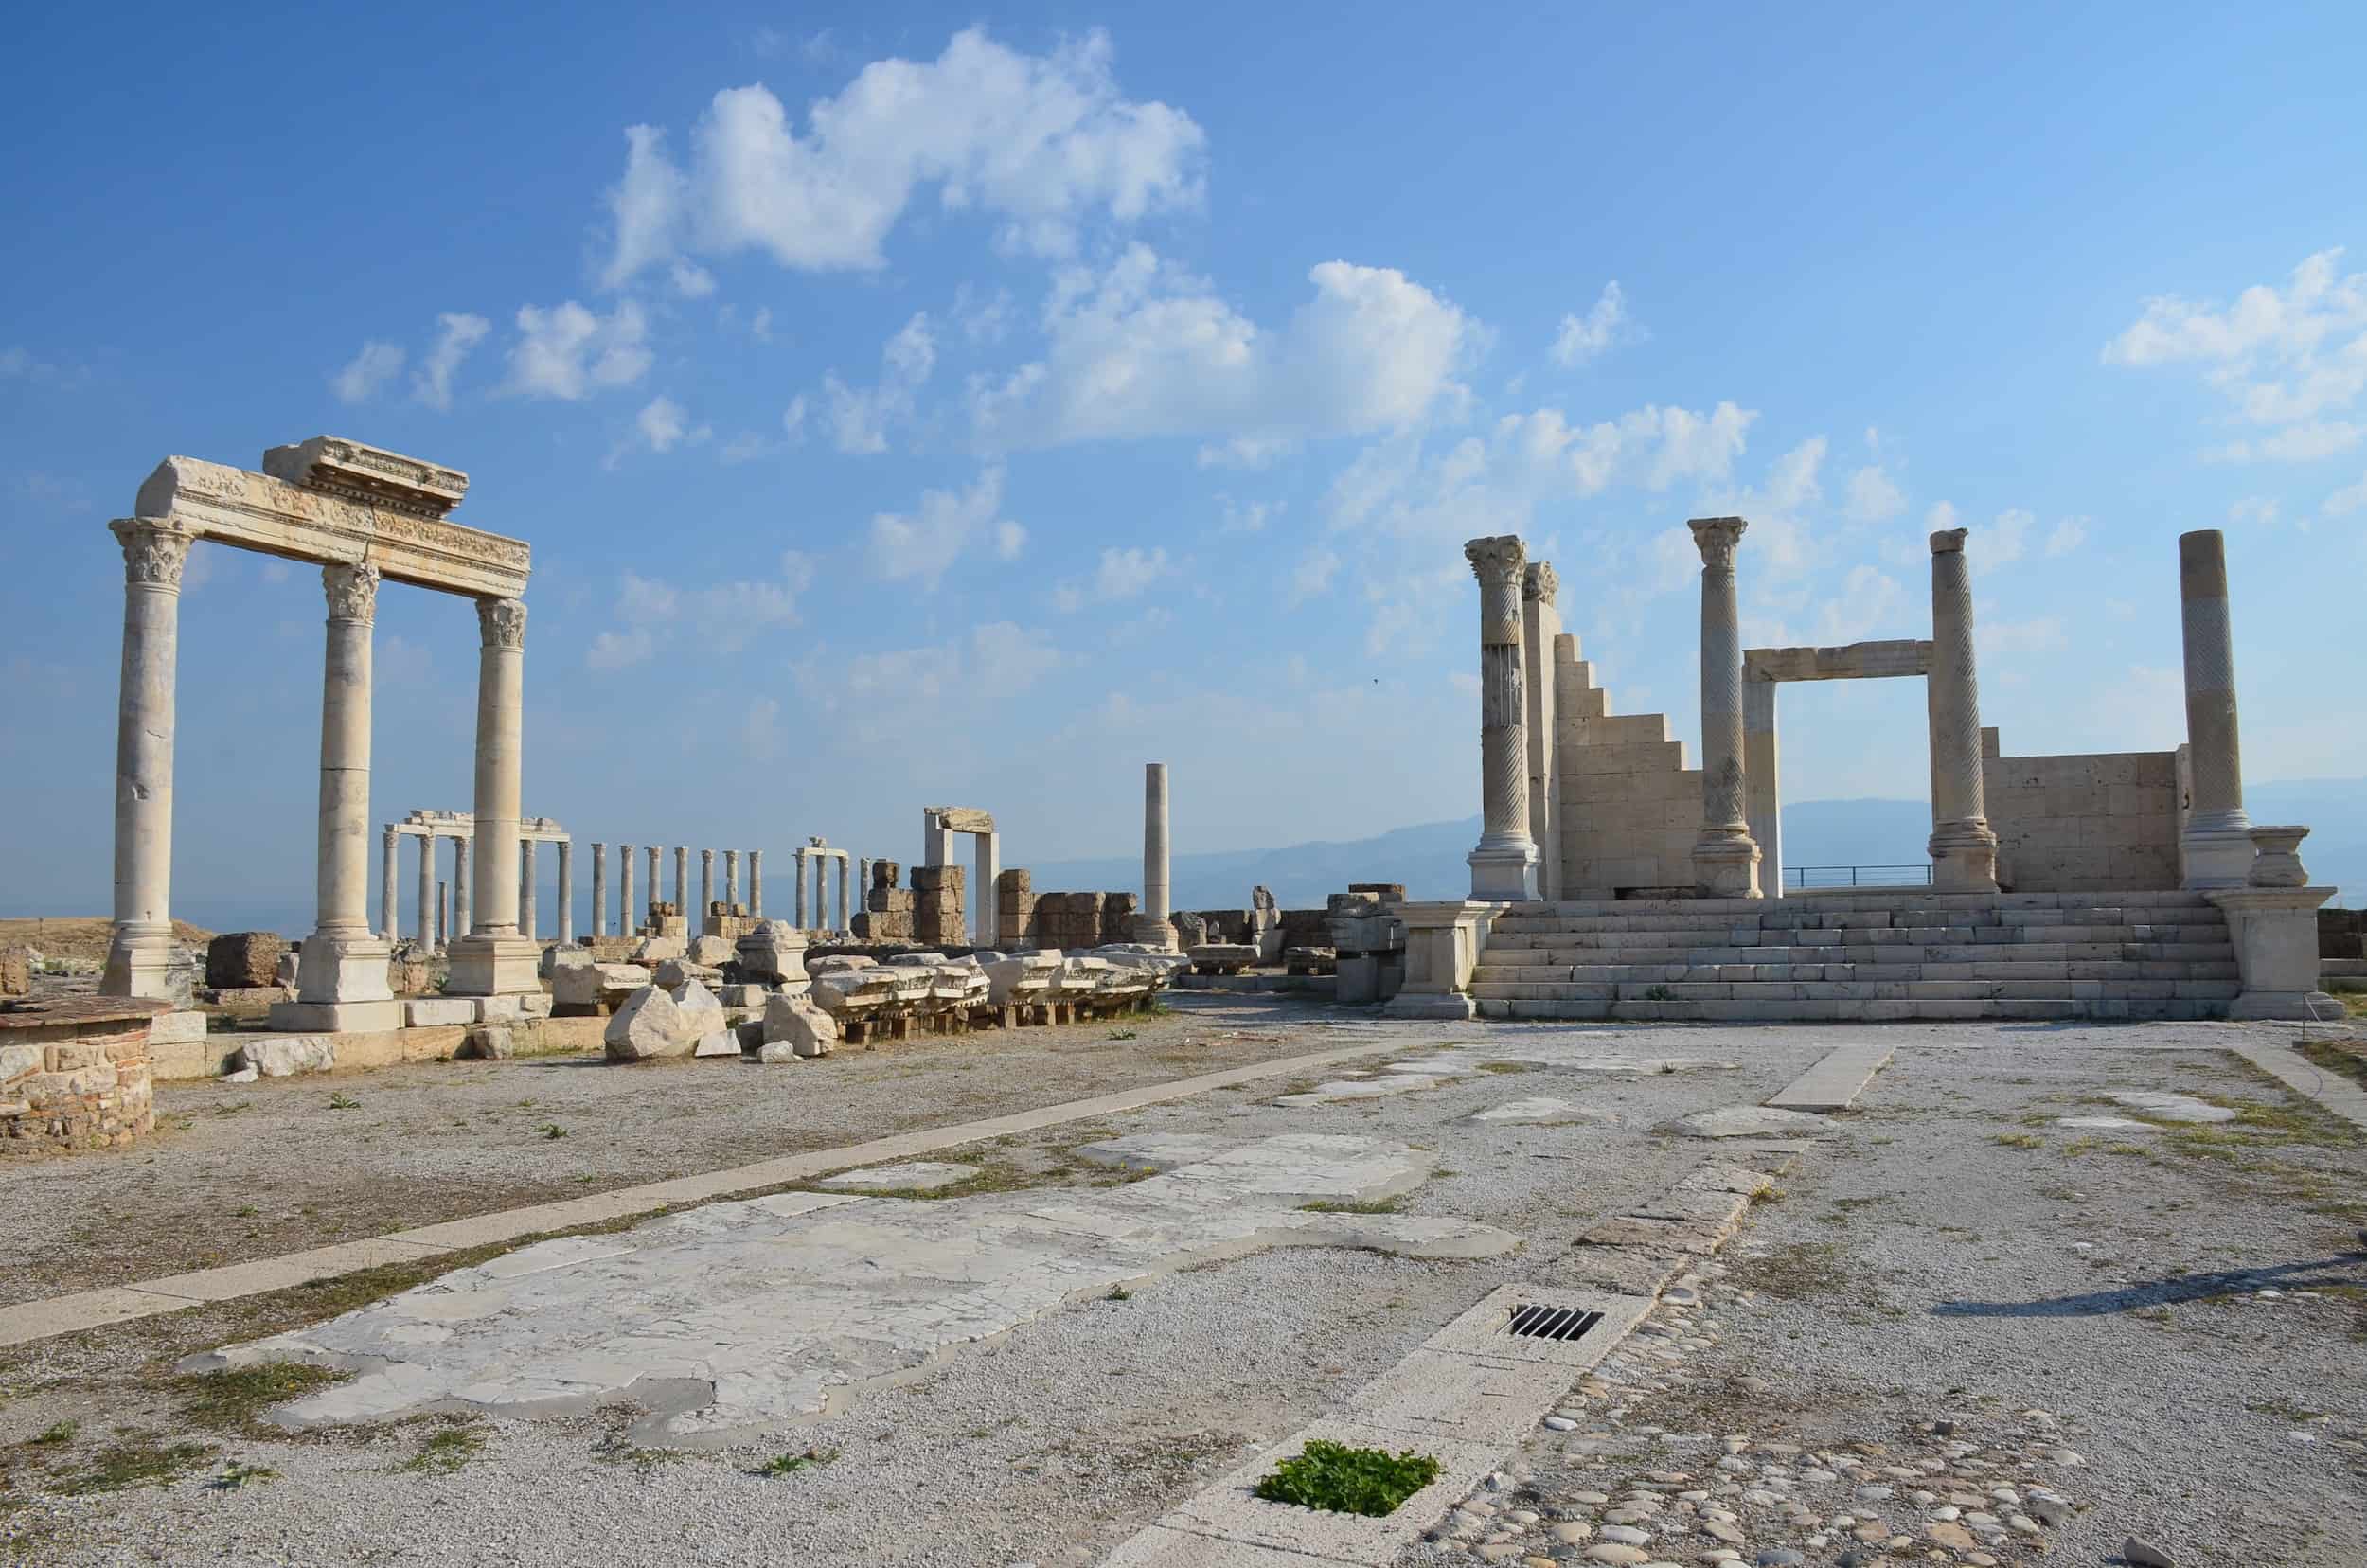 Courtyard of Temple A in Laodicea